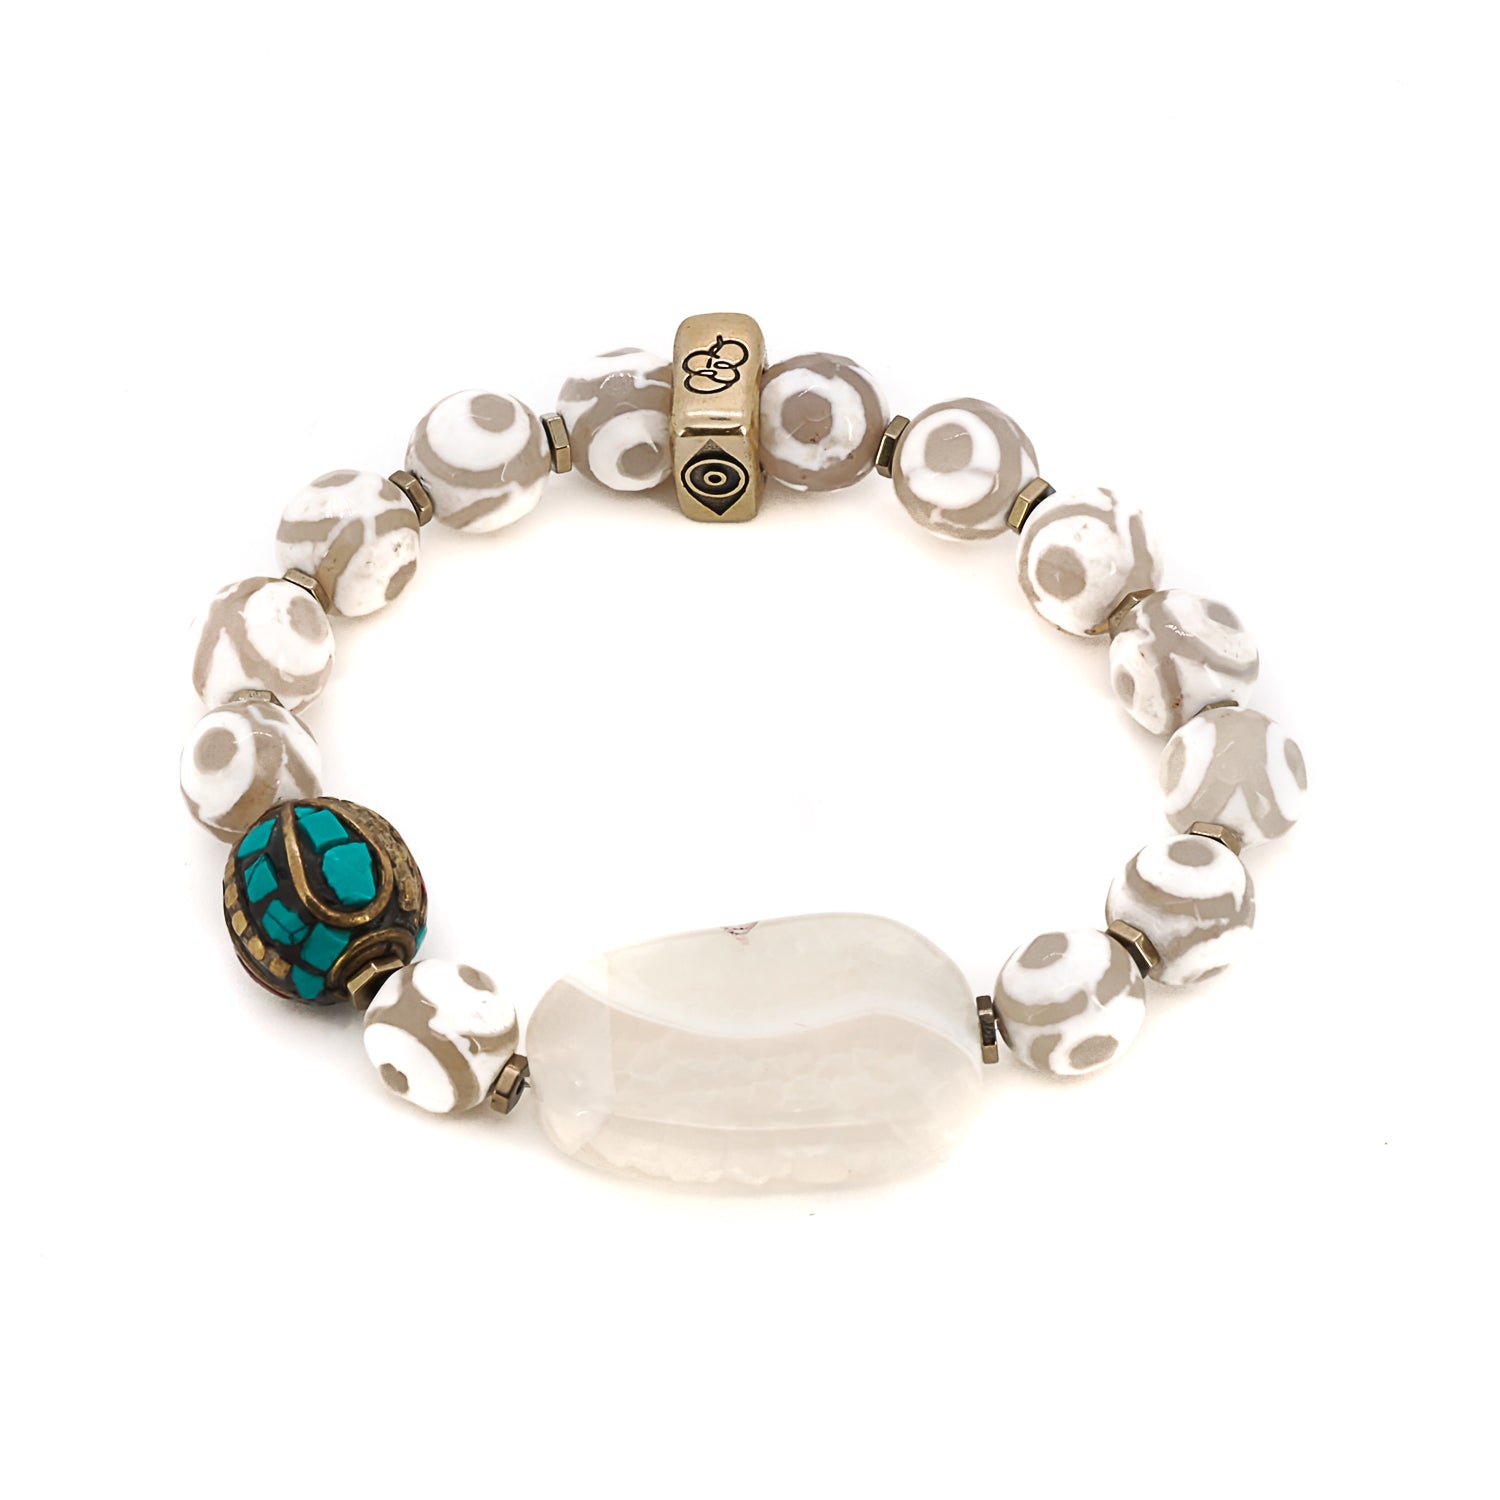 Eye of Nepal Bracelet - Handmade jewelry featuring white Nepal agate and green agate beads, adorned with powerful bronze symbol beads.&quot;